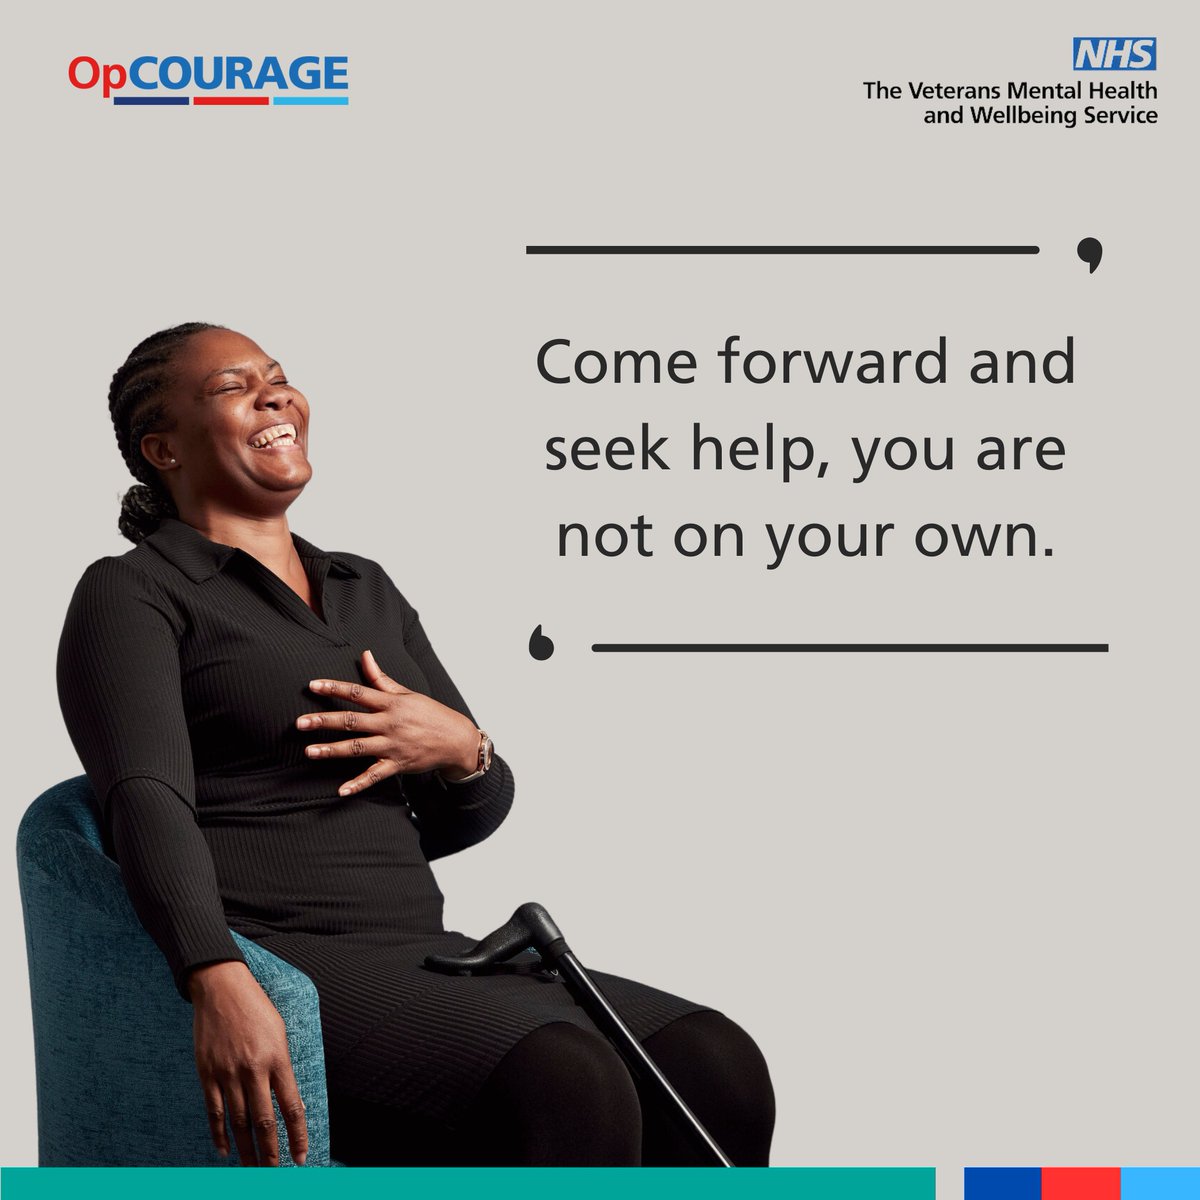 Mental ill health can affect anyone. Veterans in England can access Op COURAGE for support with their mental health and wellbeing. Find out more at 👉 nhs.uk/opcourage. #MidlandsOpCourage